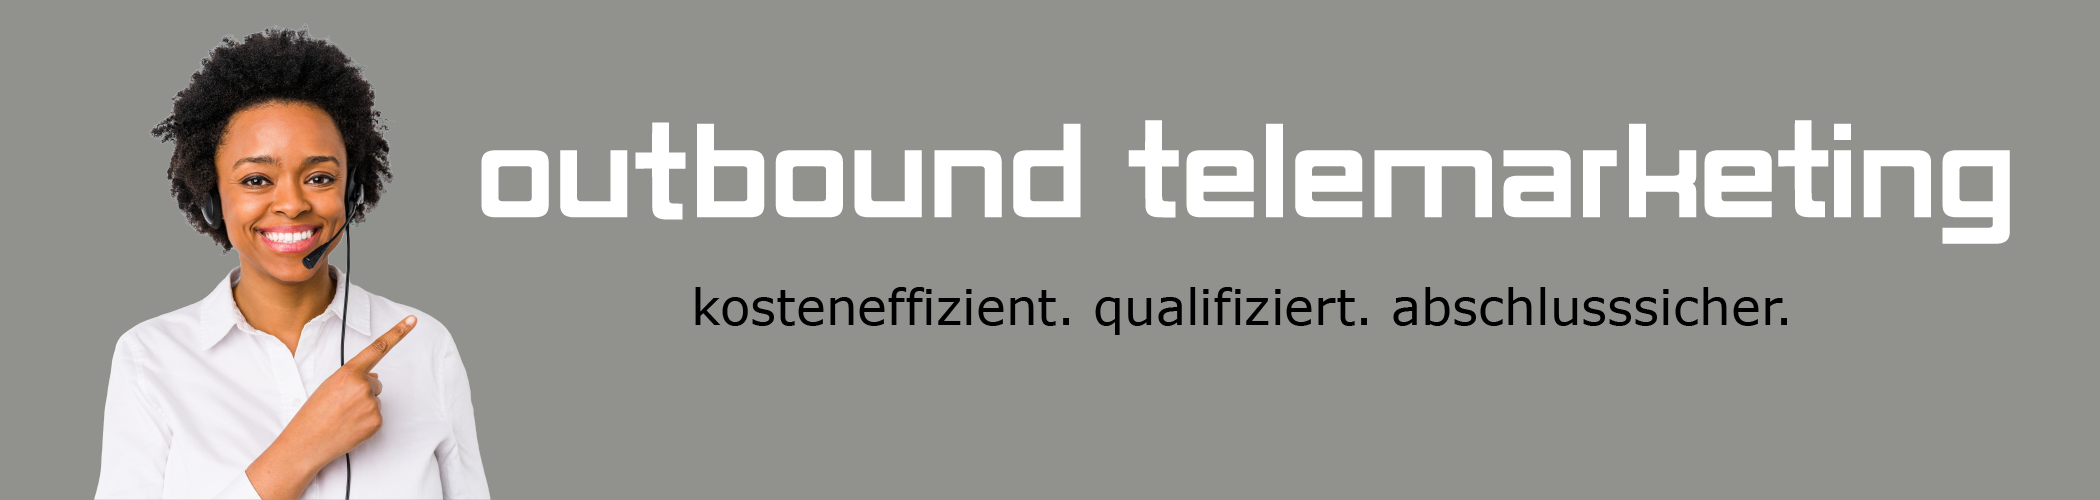 Outbound Telesales